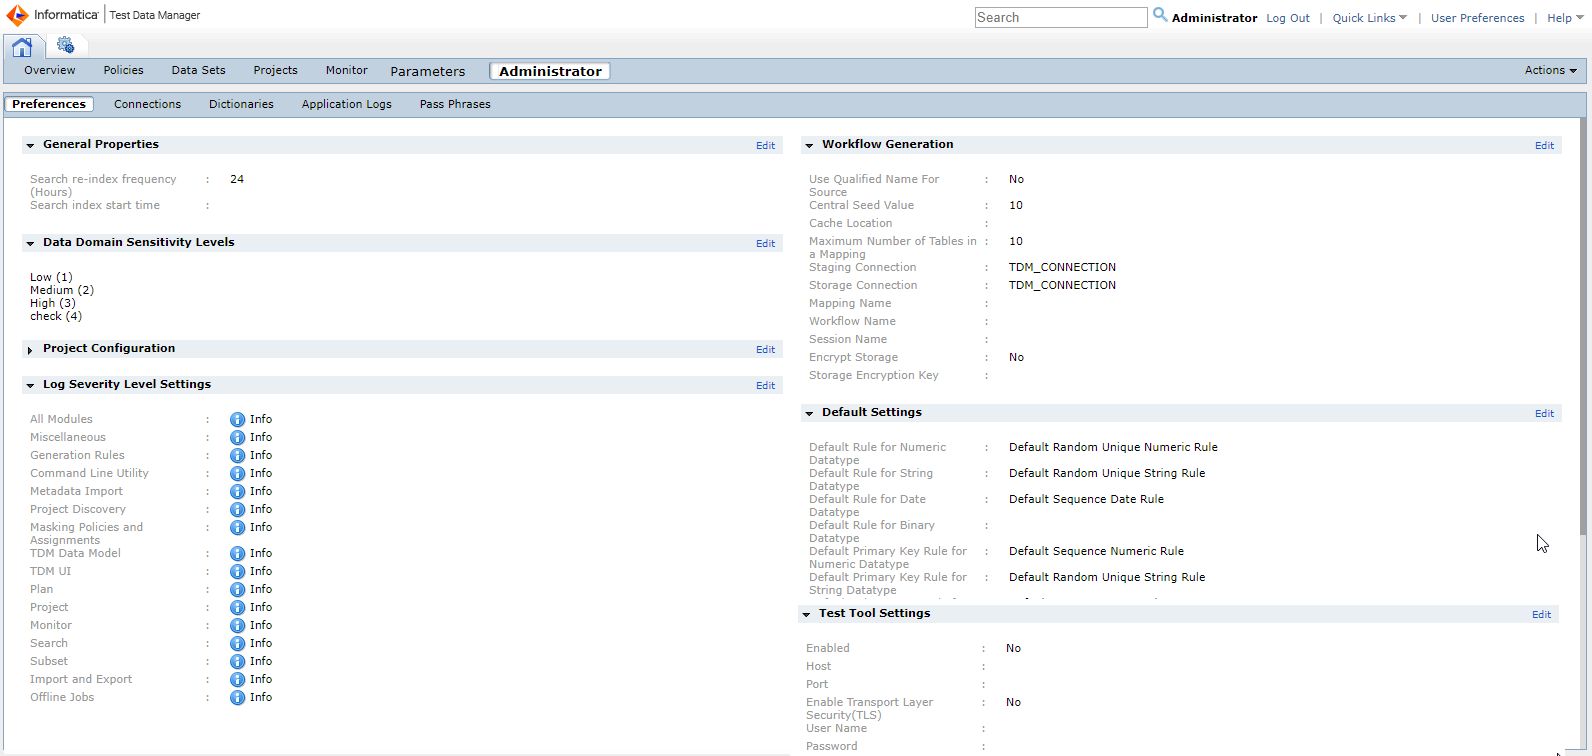 The Administrator view contains the following views: Preferences, Connections, Dictionaries, Application Logs, and Pass Phrases. Each view contains a contents panel and details panel.
			 